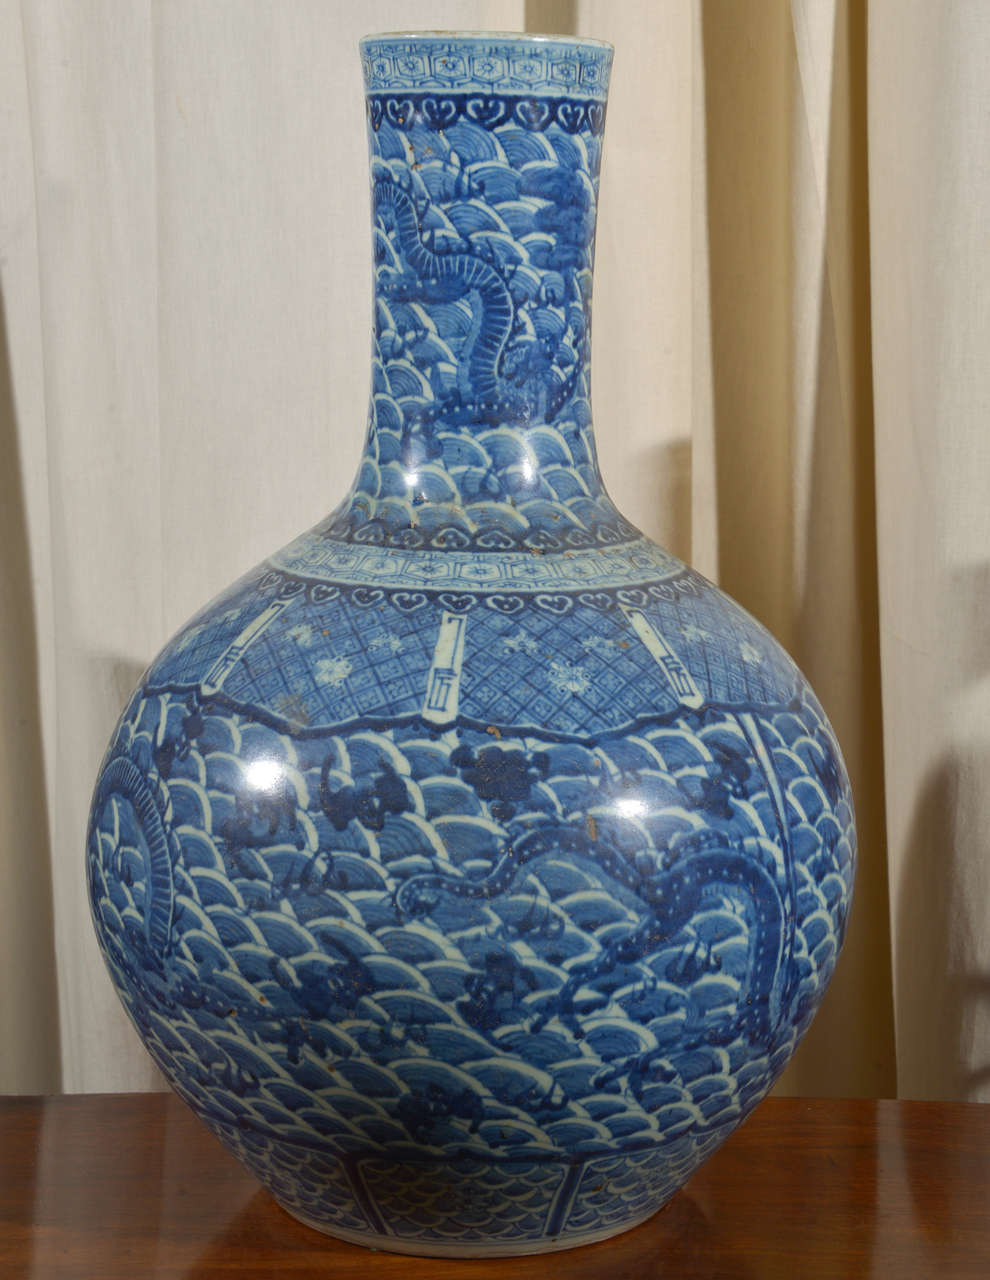 Large antique blue and white globular-shape dragon vase with tall neck and wood stand (25